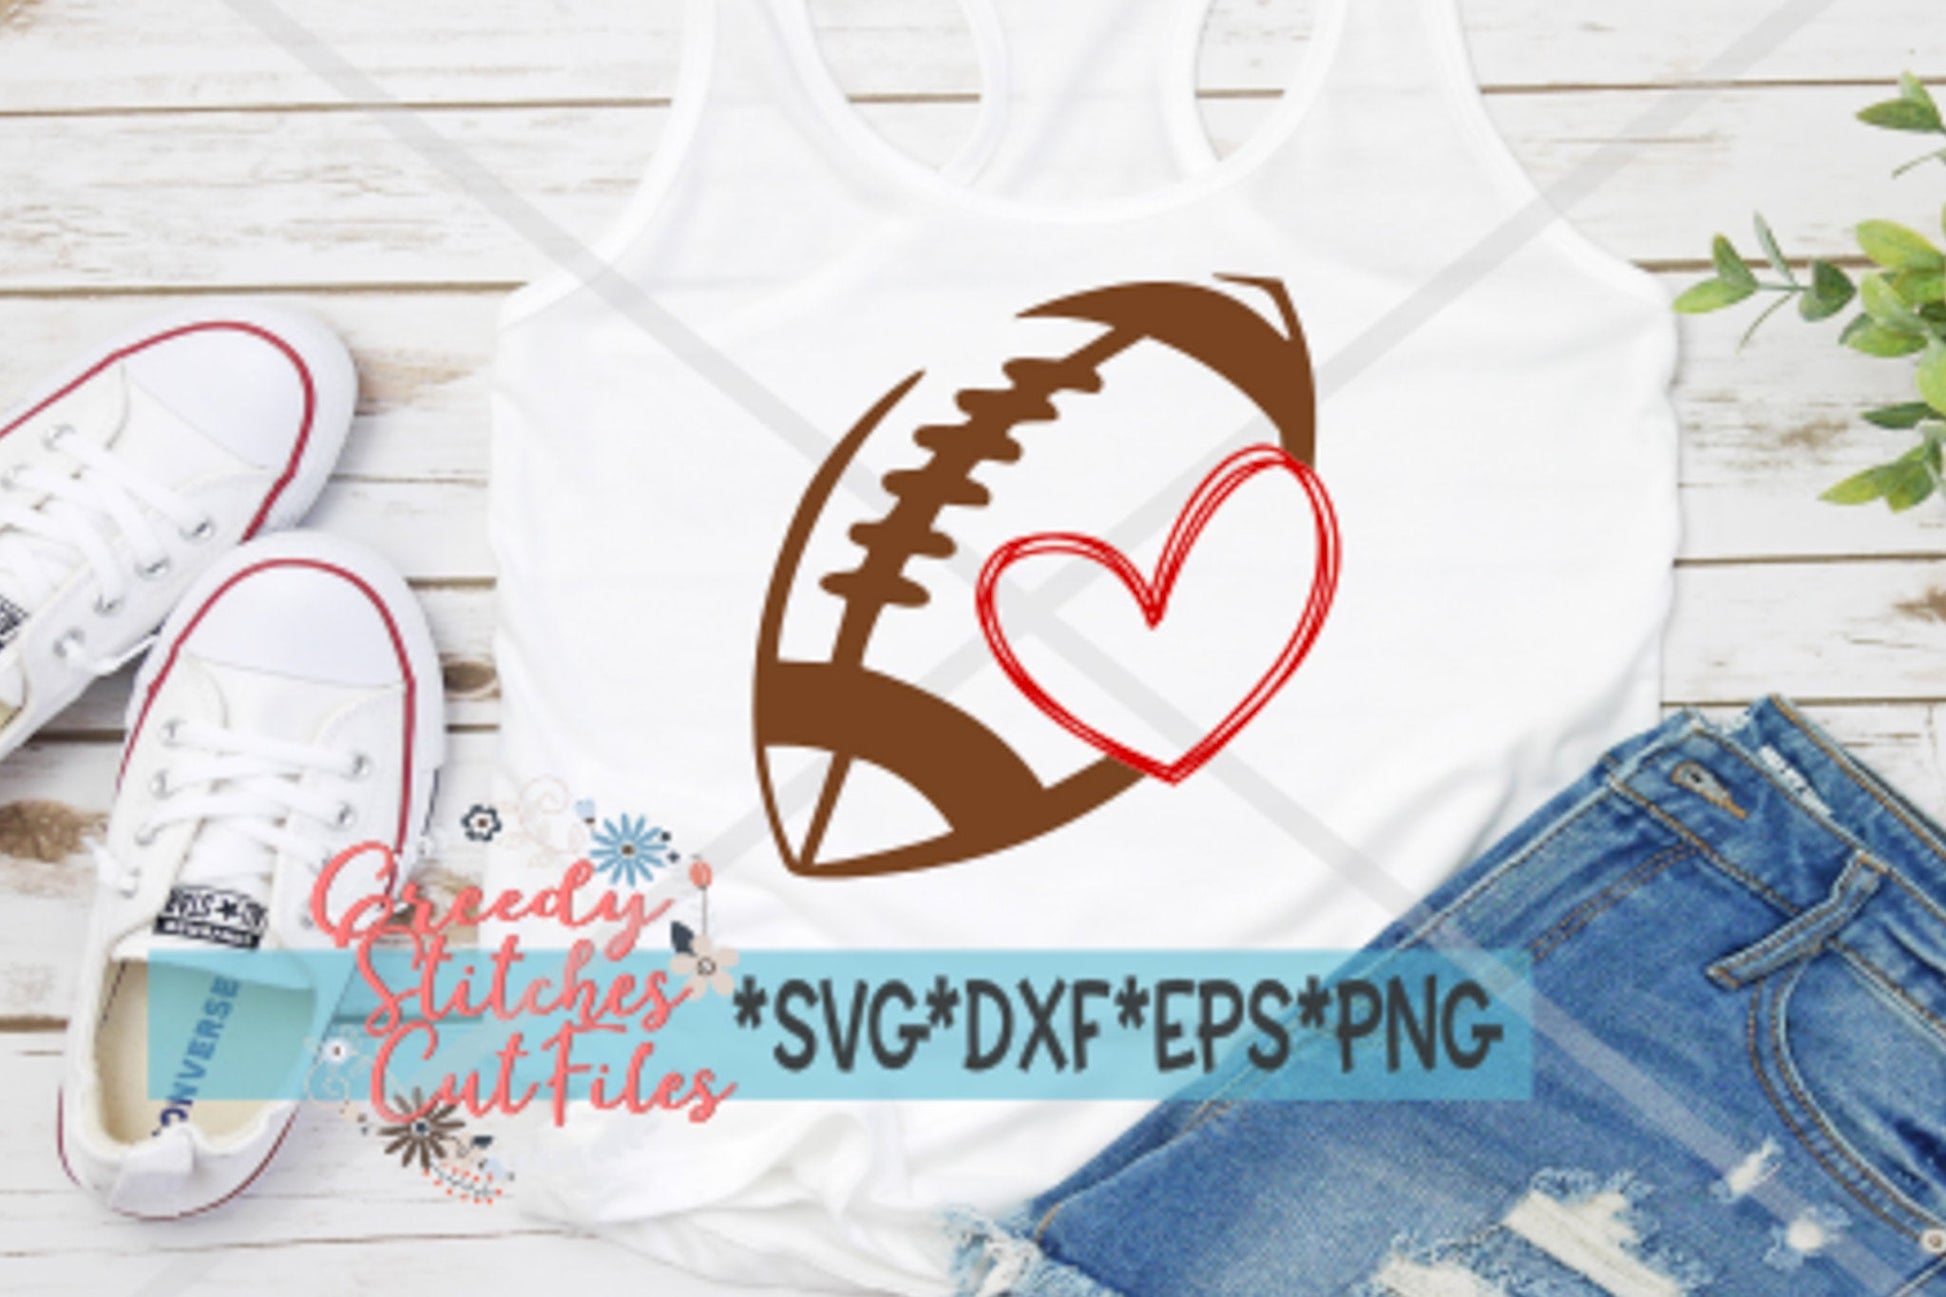 Football Heart svg eps dxf png | Football DxF | Football SvG | Friday Night Lights SvG | Football Heart SvG | Instant Download Cut File